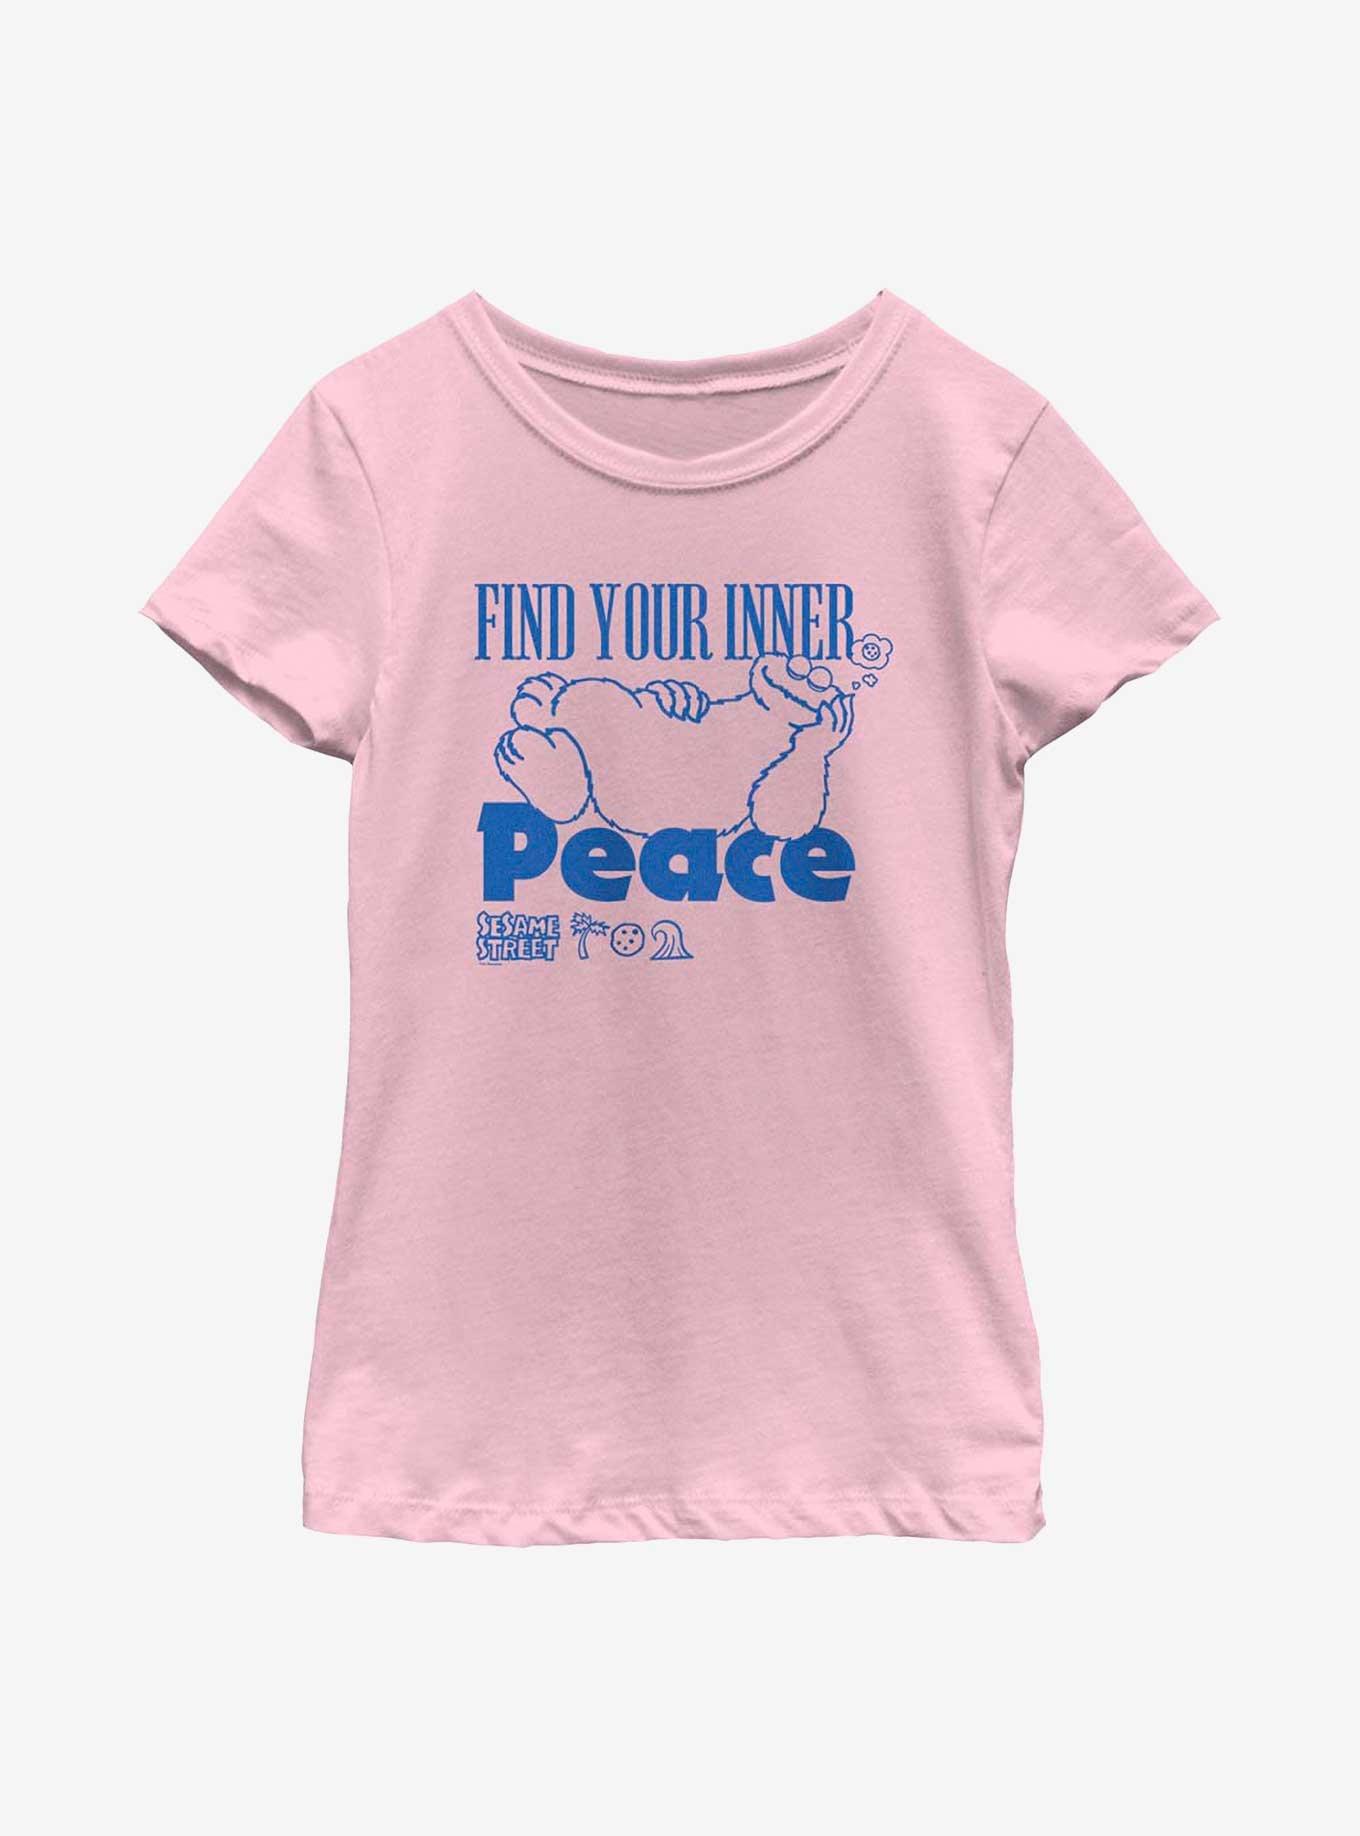 Sesame Street Cookie Monster Find Your Inner Peace Youth Girls T-Shirt, PINK, hi-res